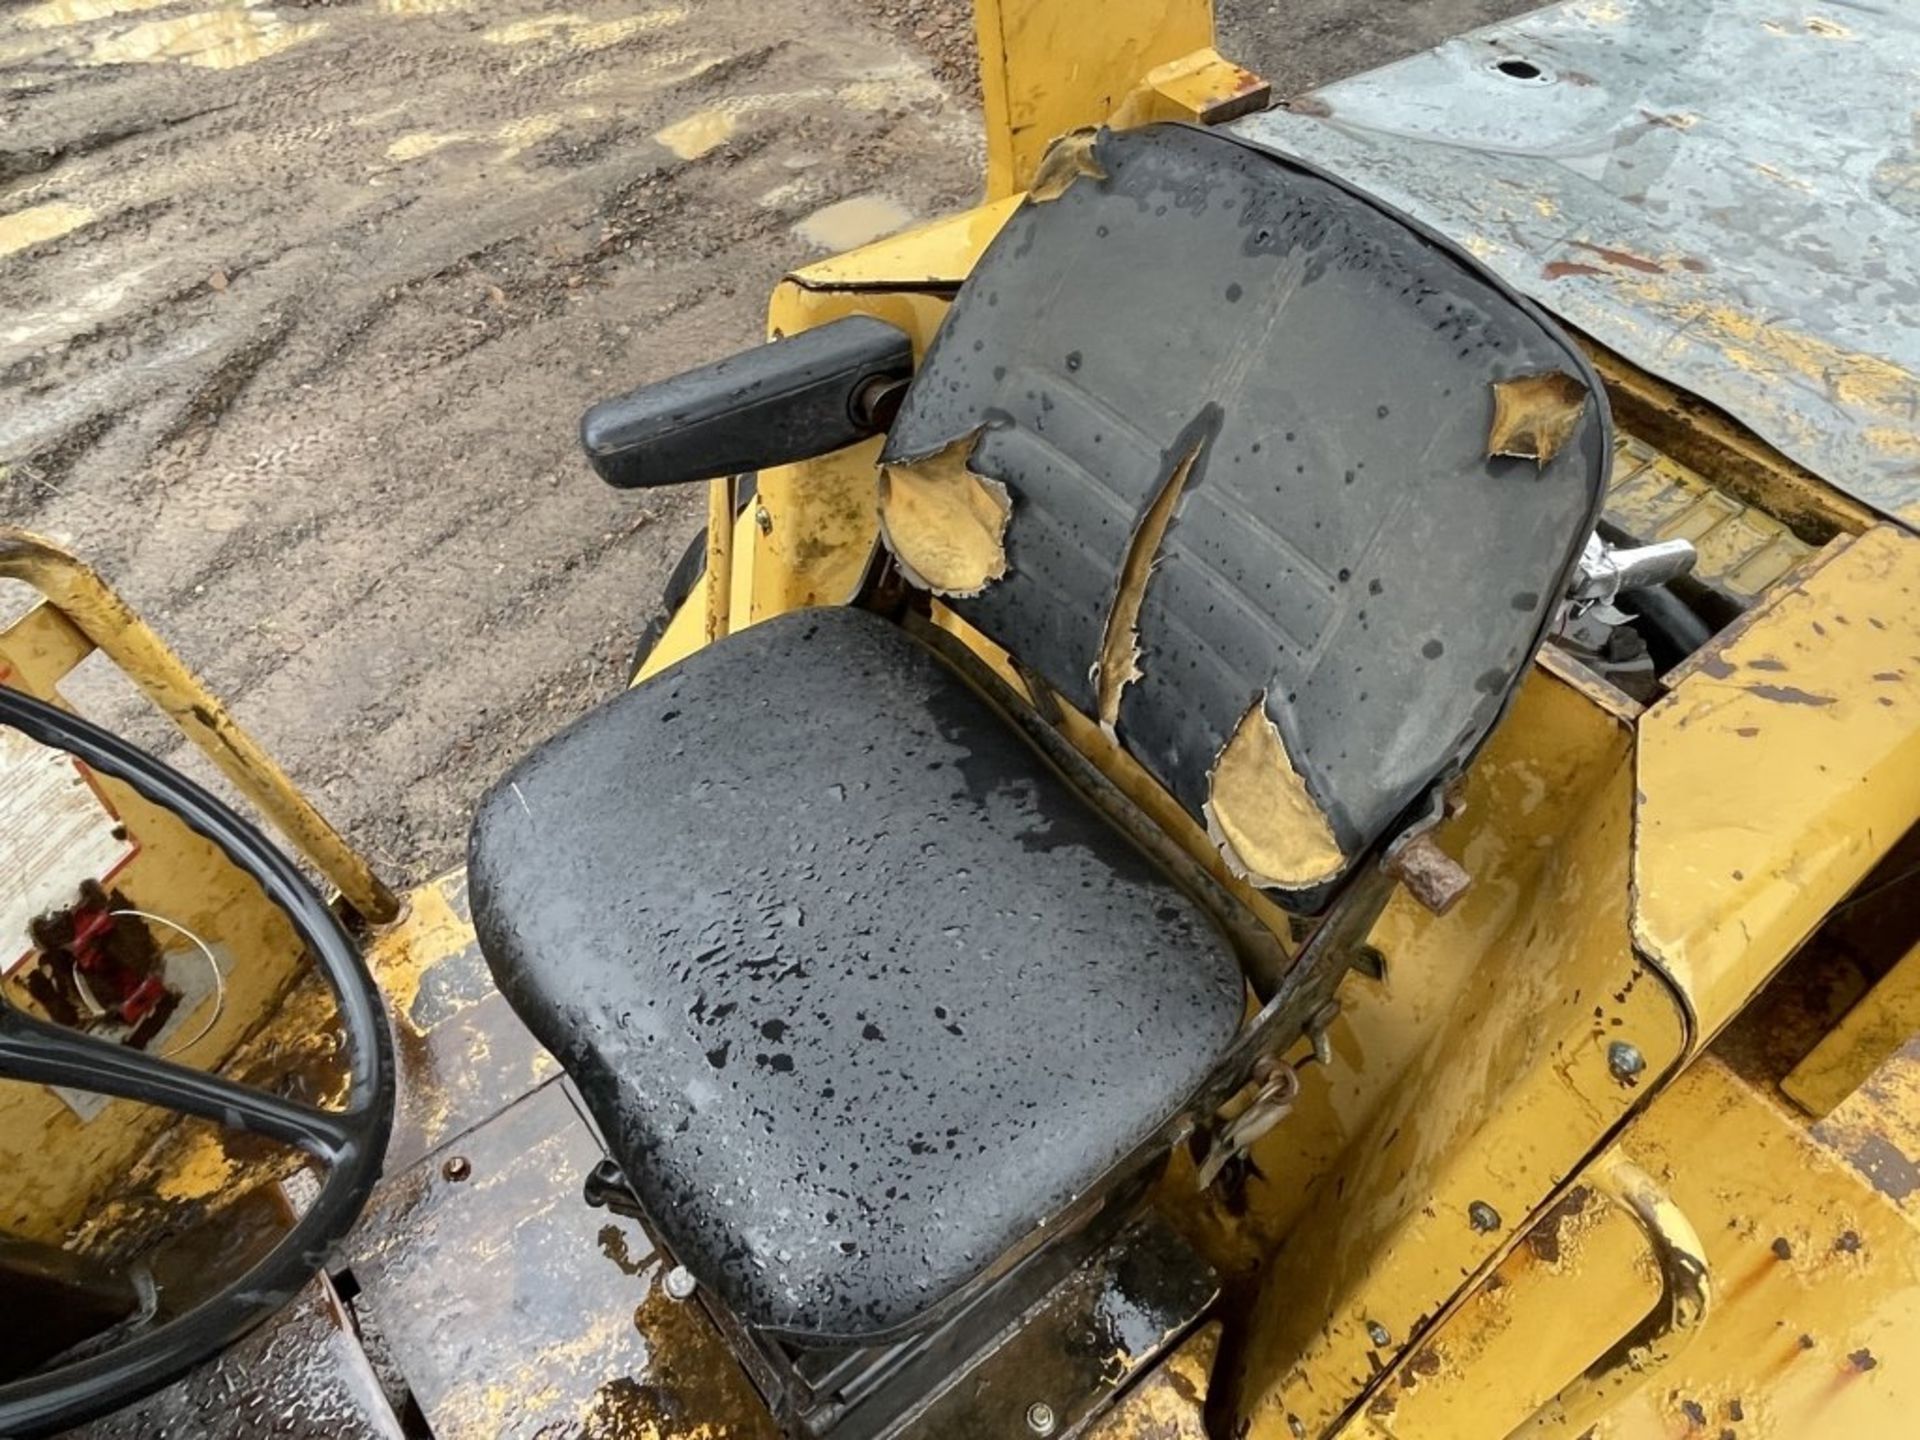 1987 Hyster C850A Vibratory Roller - Image 18 of 22